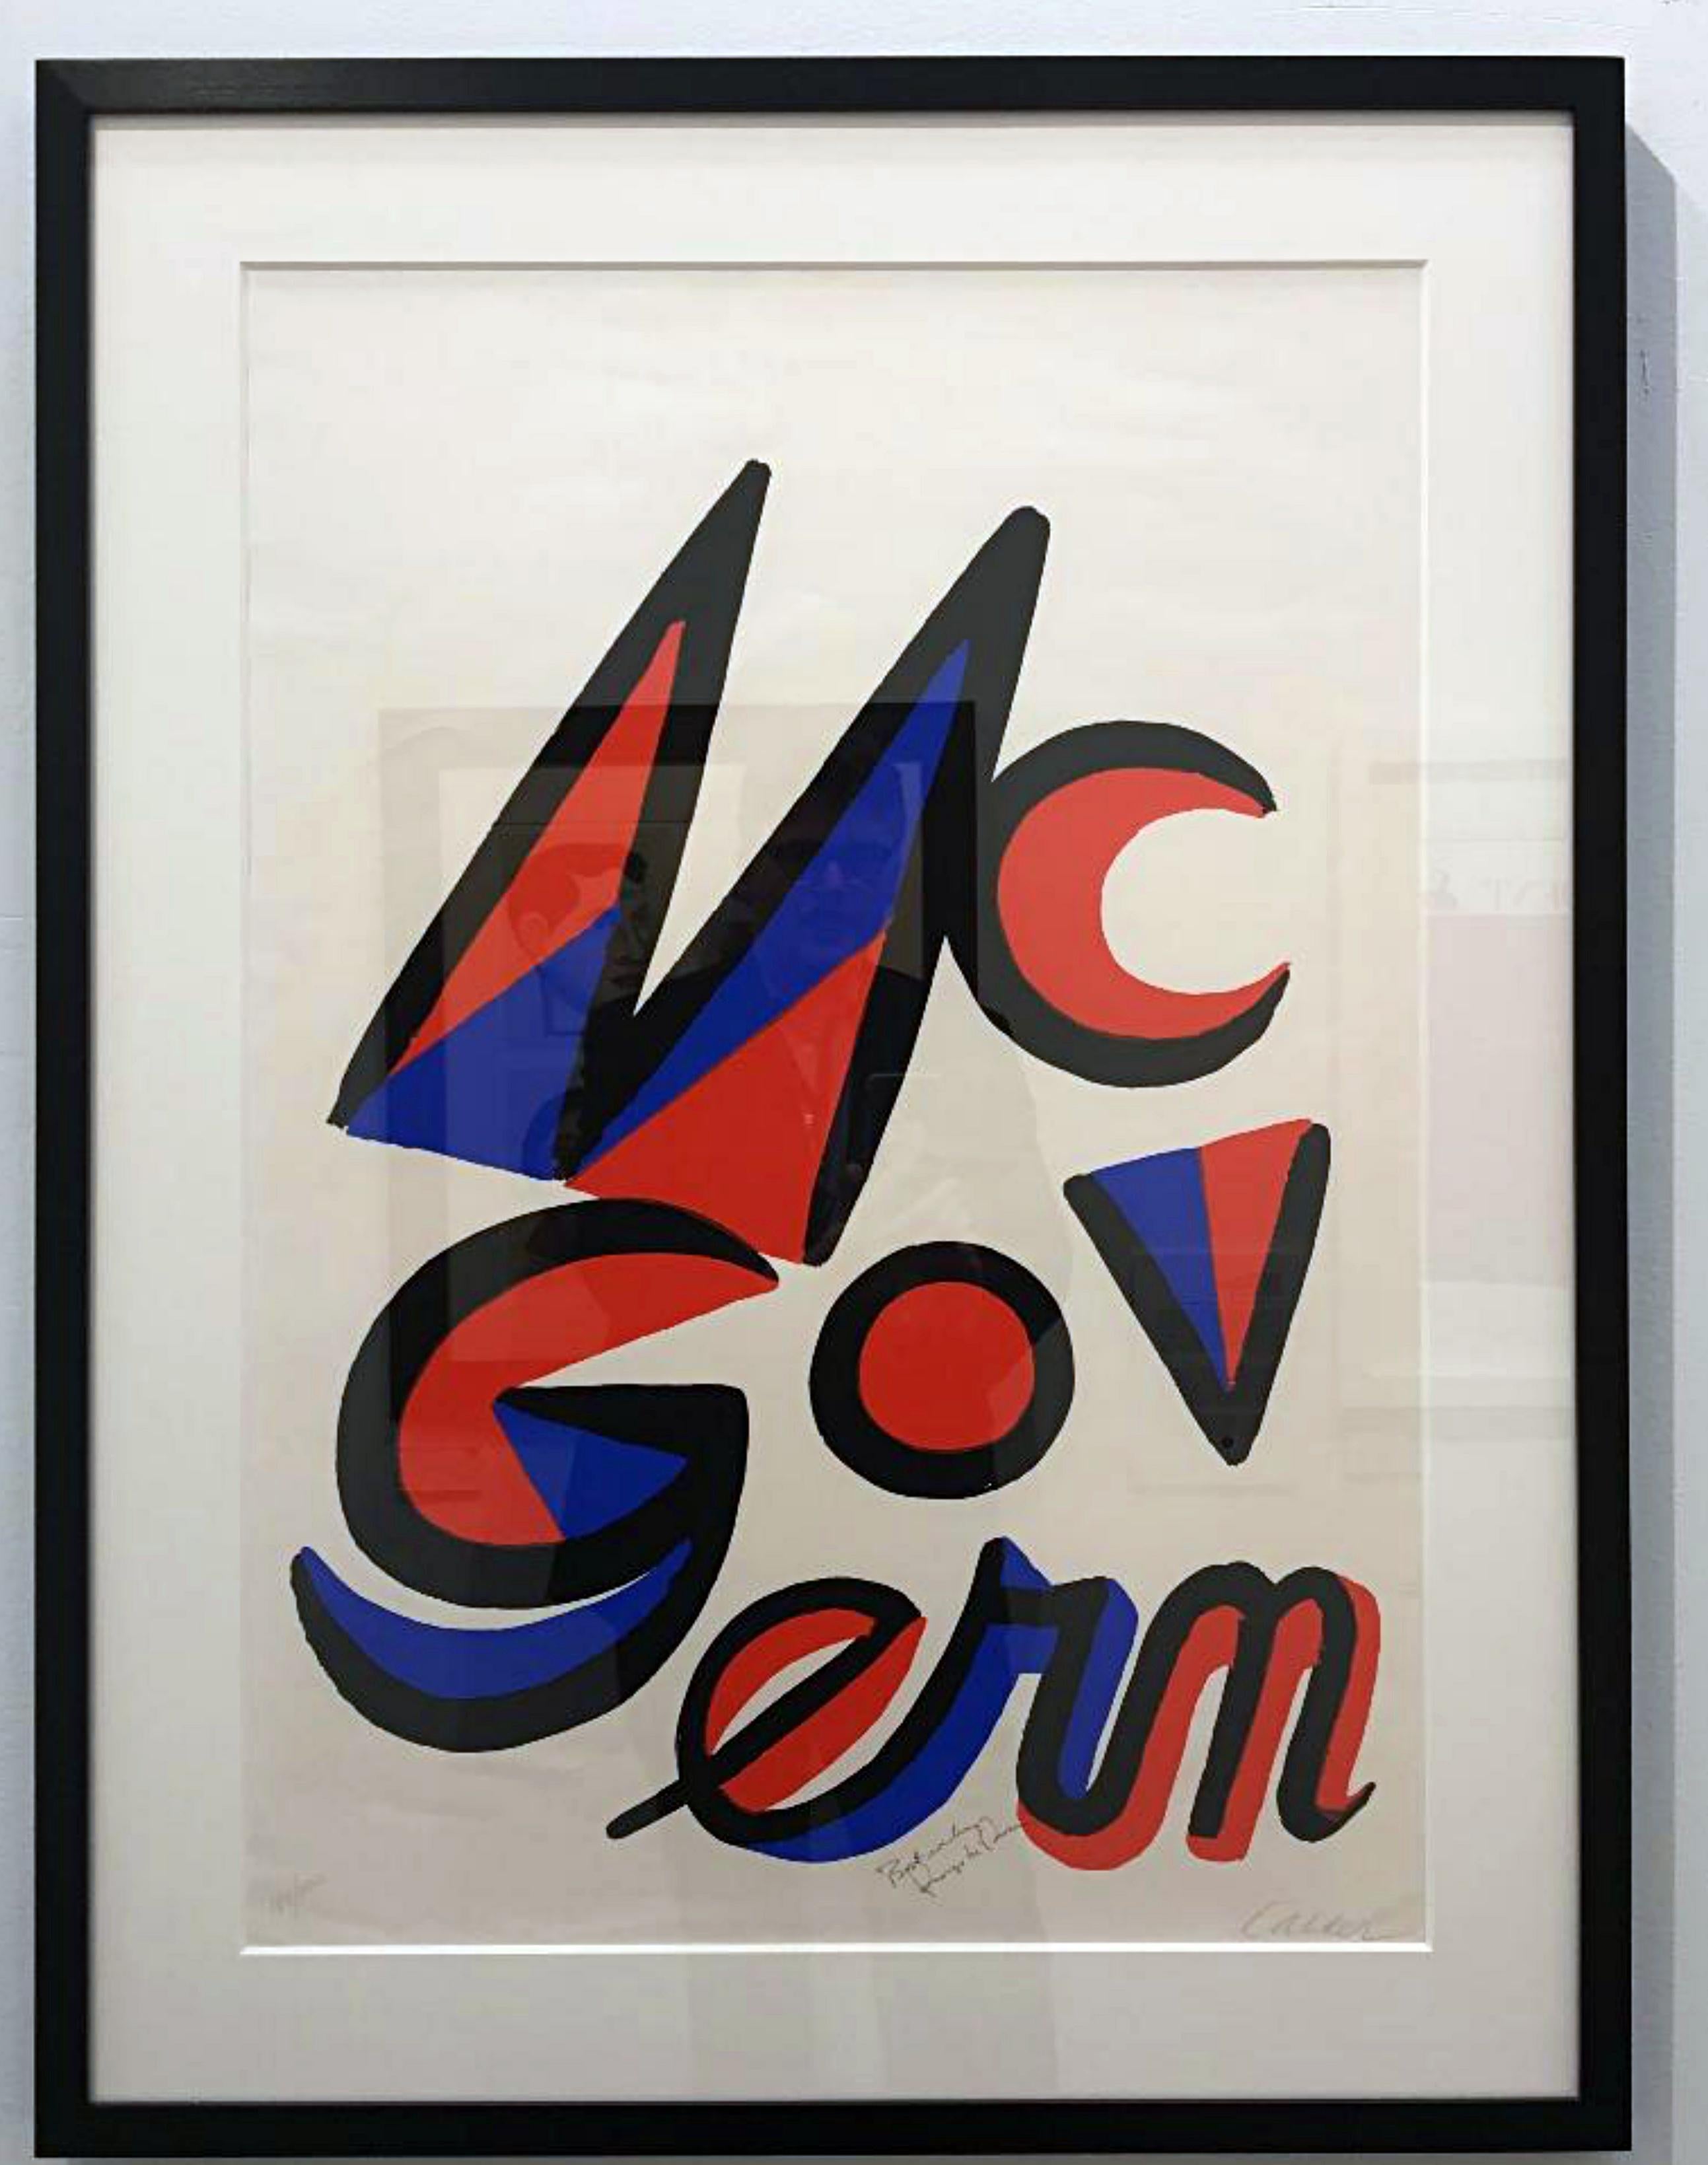 McGovern for McGovernment (Signed by BOTH Alexander Calder and George McGovern)